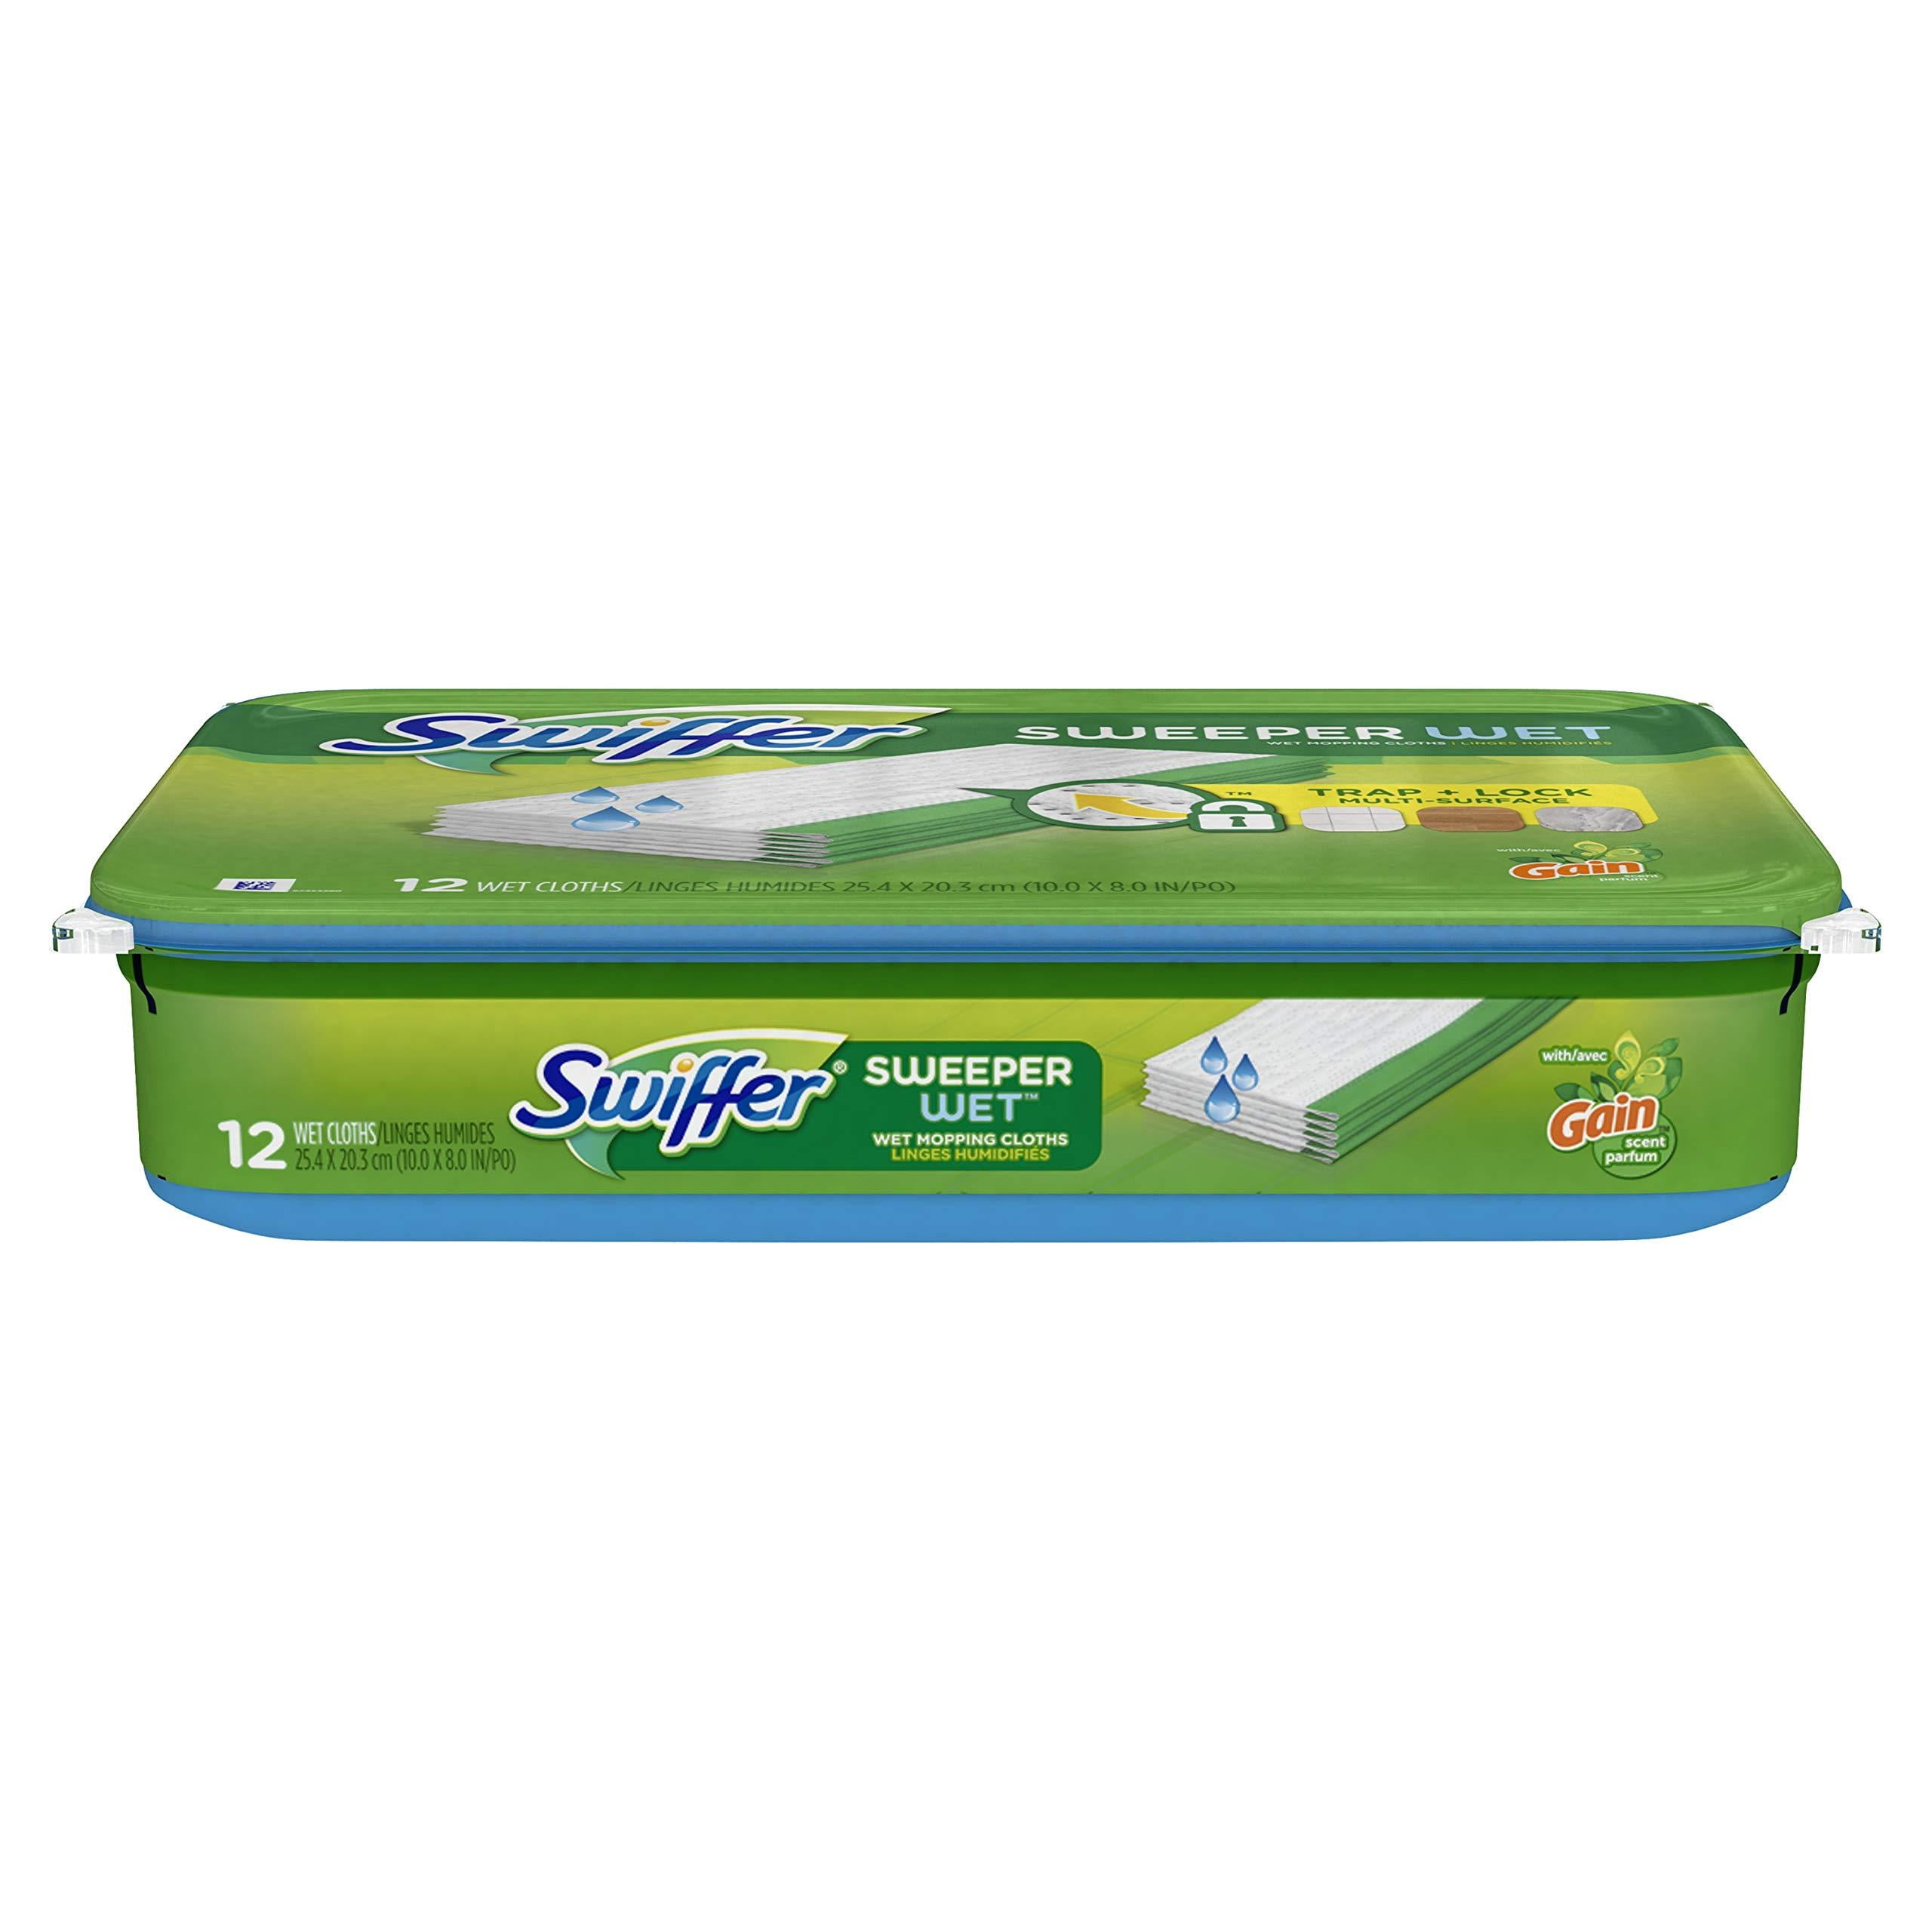 Swiffer Sweeper Wet Mopping Cloths, Gain Original, 24 Count